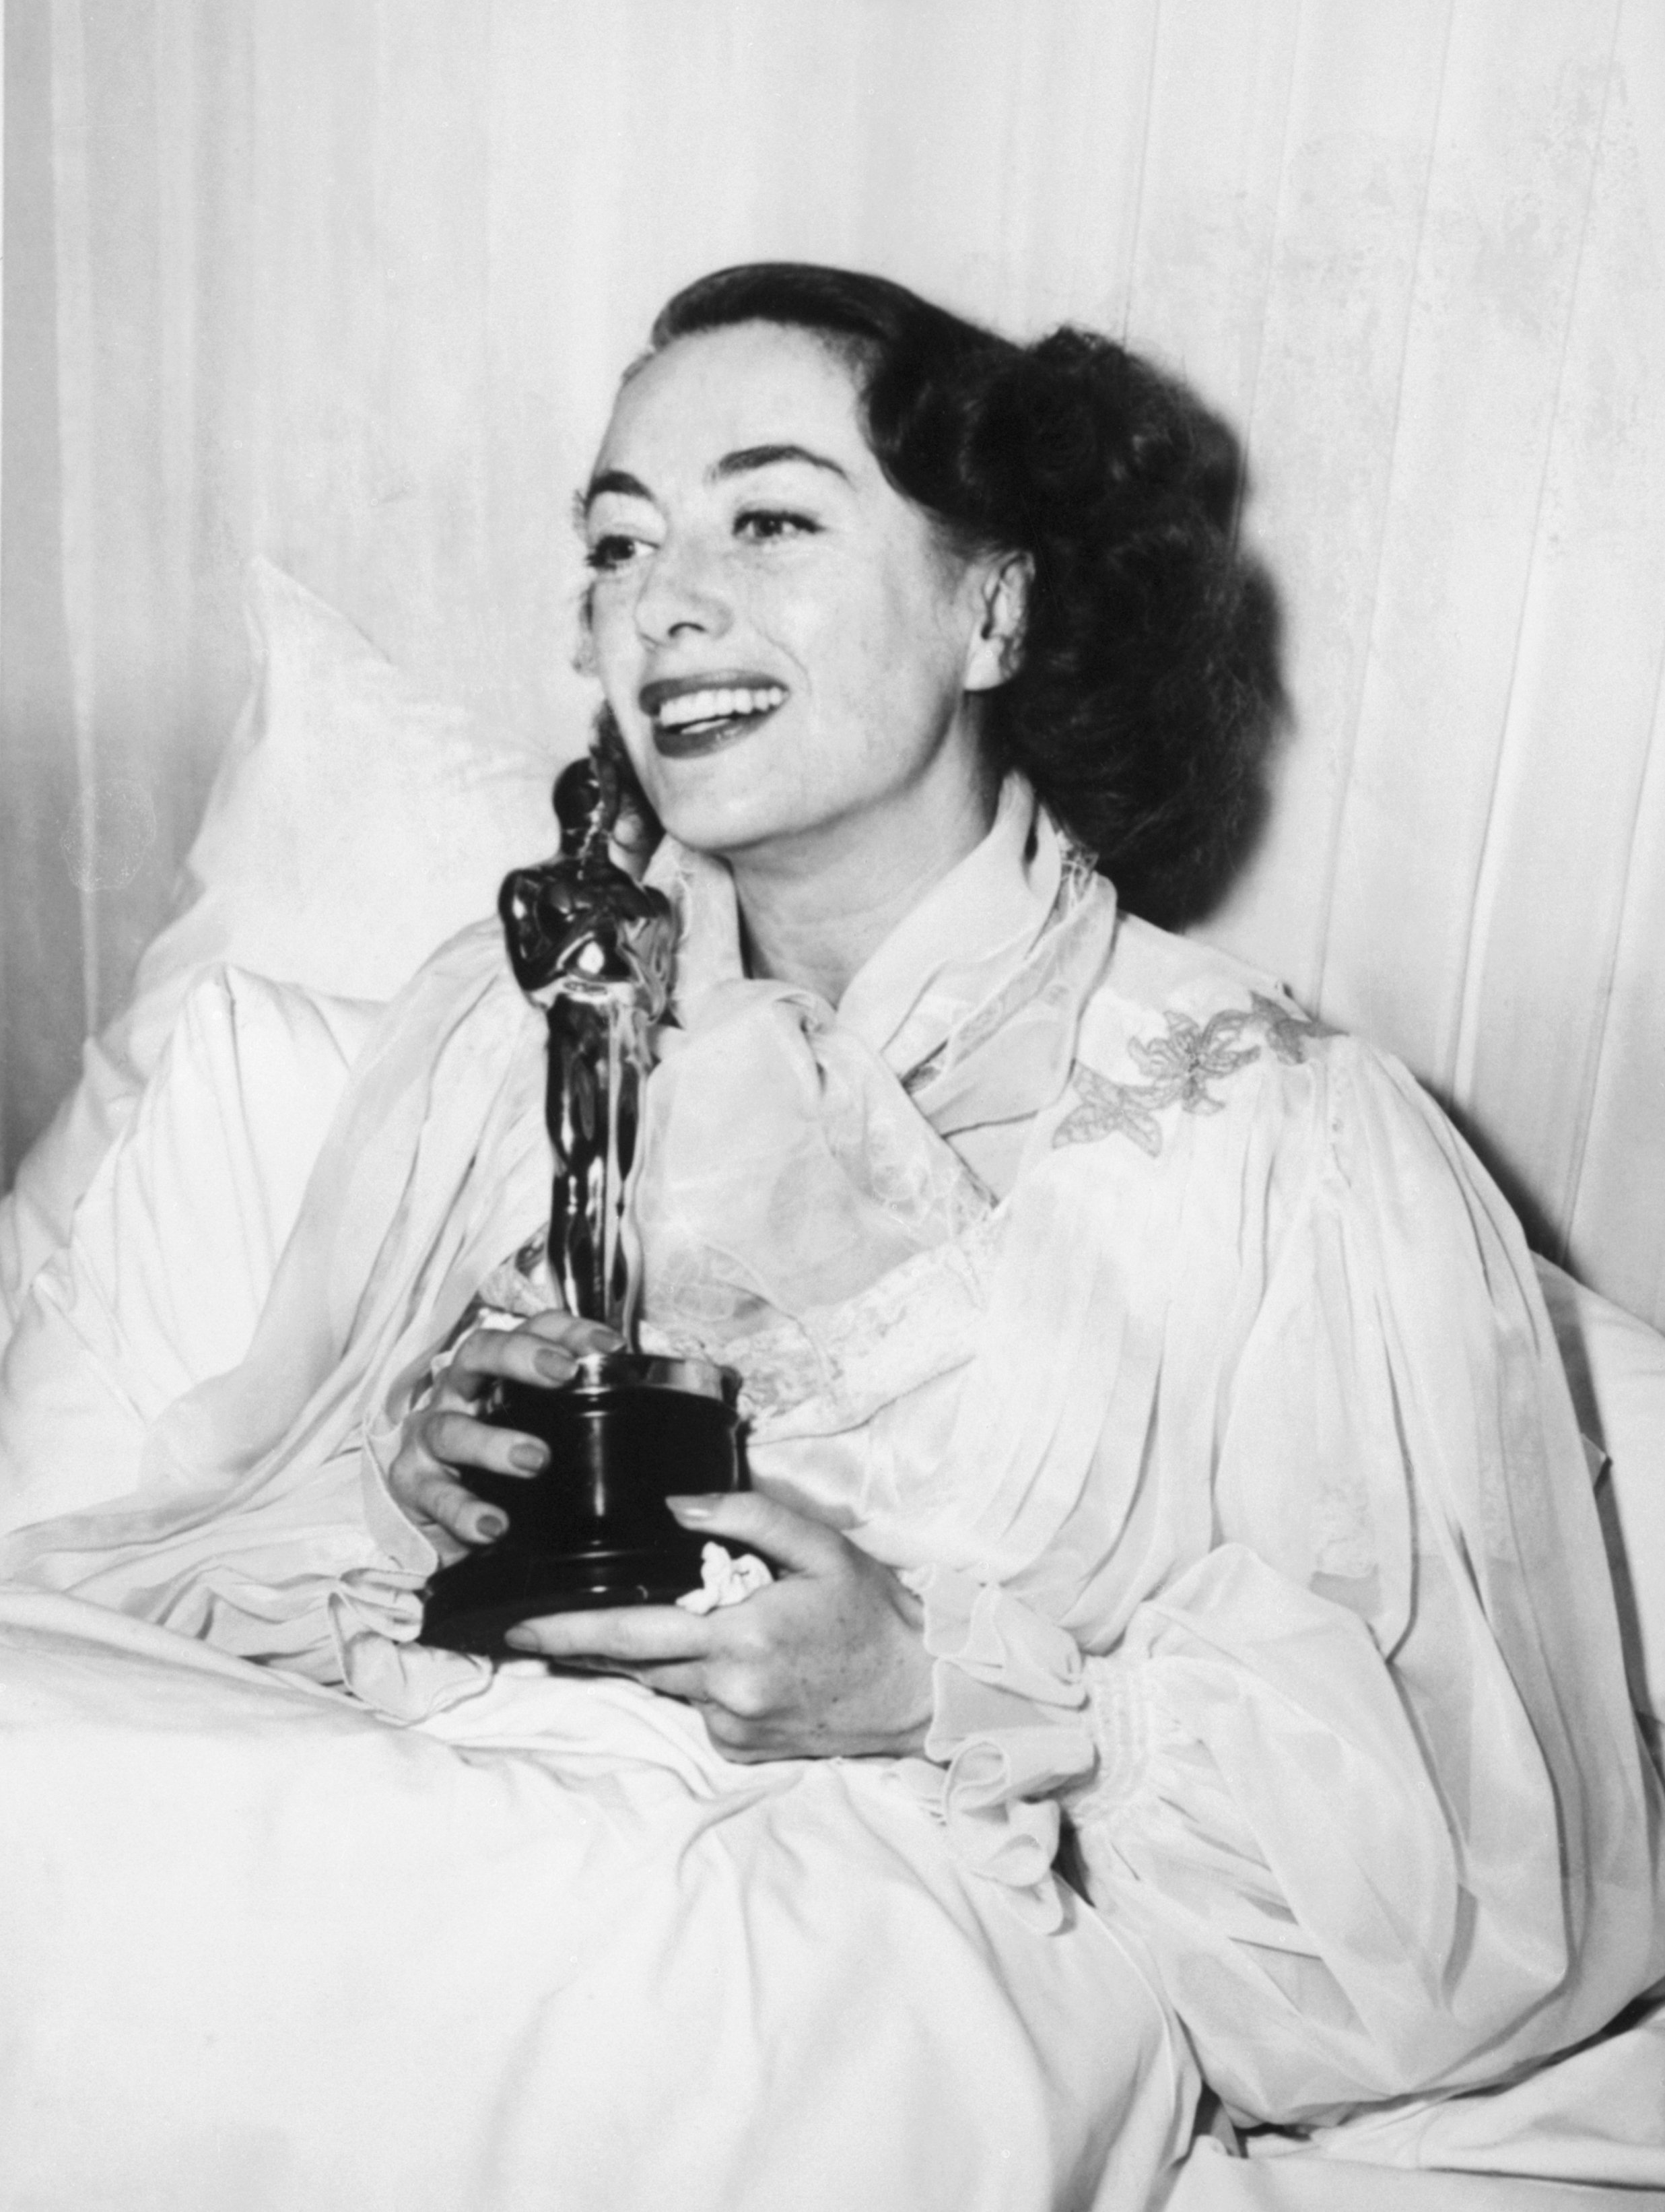 Hollywood starlet Joan Crawford smiling while holding her Academy Award on March 9 in 1946. / Source: Getty Images